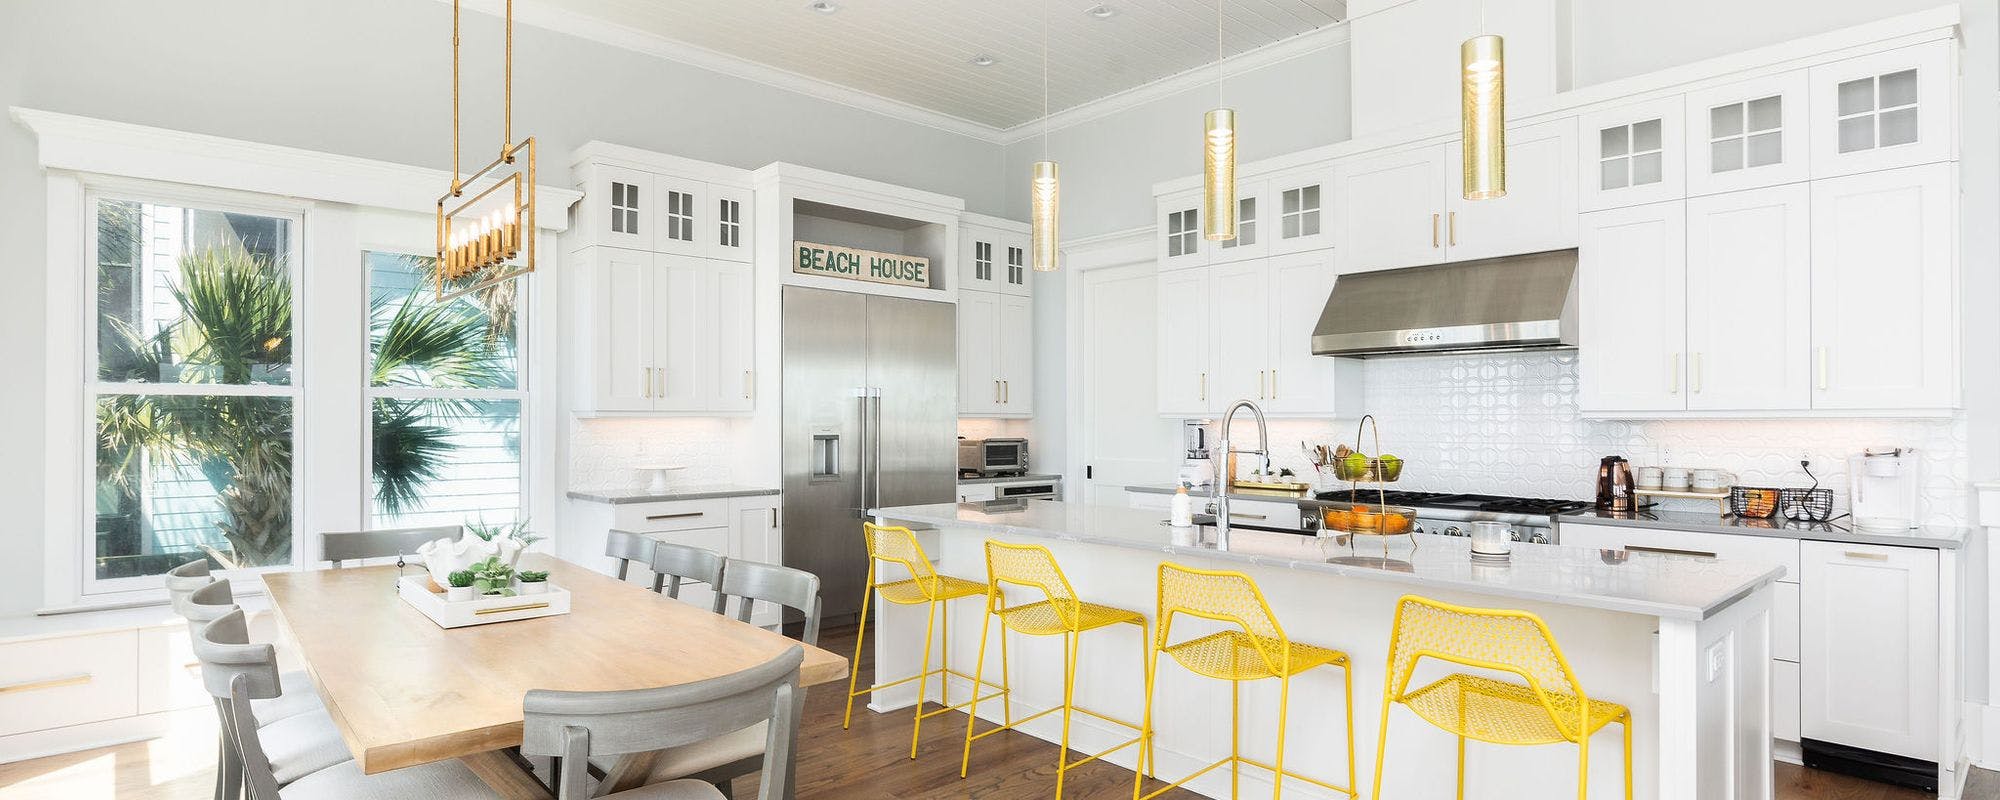 Bright and airy kitchen at this Folly Beach vacation rental home.